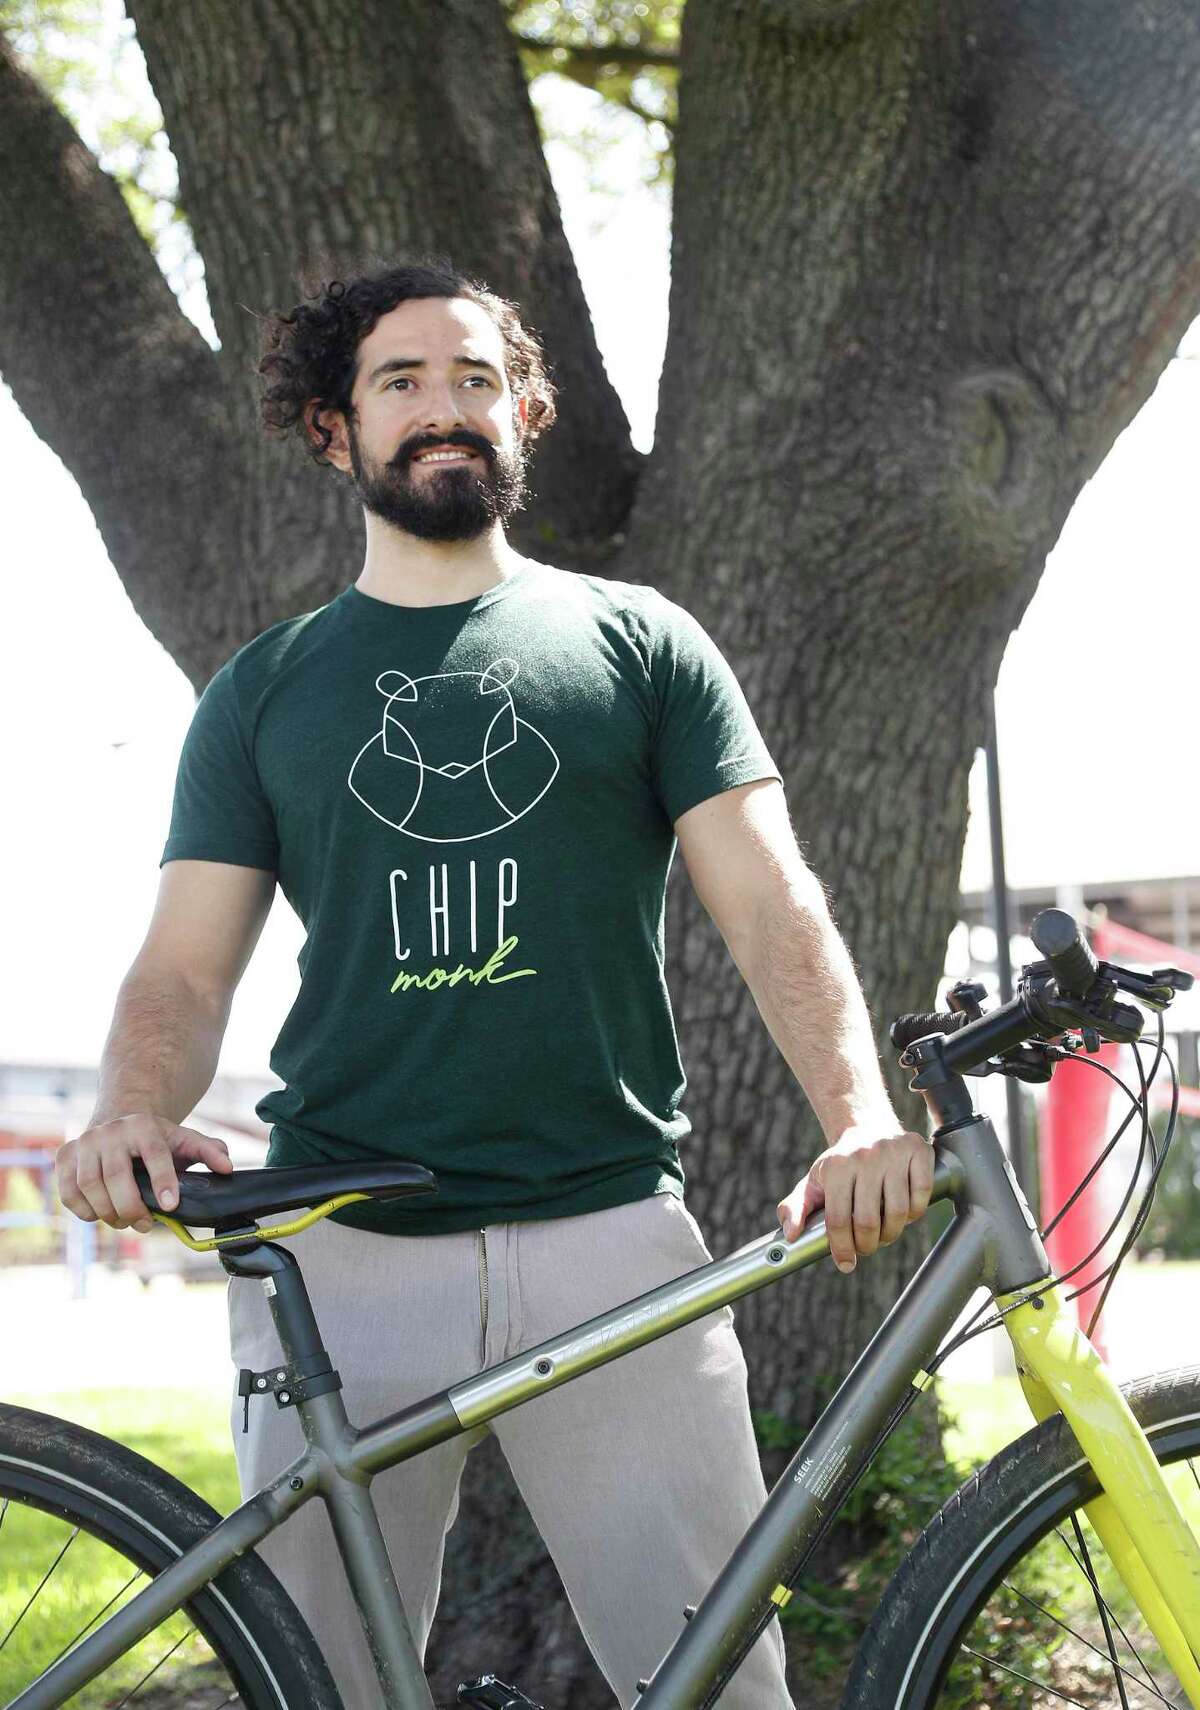 Jose Hernandez poses with his bike in Houston, Thursday, May 7, 2020. Hernandez is a transformation story, he always had a sweet tooth but never worried about it. He was fit and lean, when his energy and moods started changing. At one point, he went to the doctor to try to figure out what was going on and discovered that he had type 2 diabetes. Instead of taking medication, he completely changed his diet and started intermittent fasting. Now his blood sugar is totally normal. Because he missed sweets, he started a baking company for people like him -- with no sugar and no gluten, to stay low carb called who started ChipMonk baking. He started the business by sampling cookies at the Cannon office and now has gone into baking full time